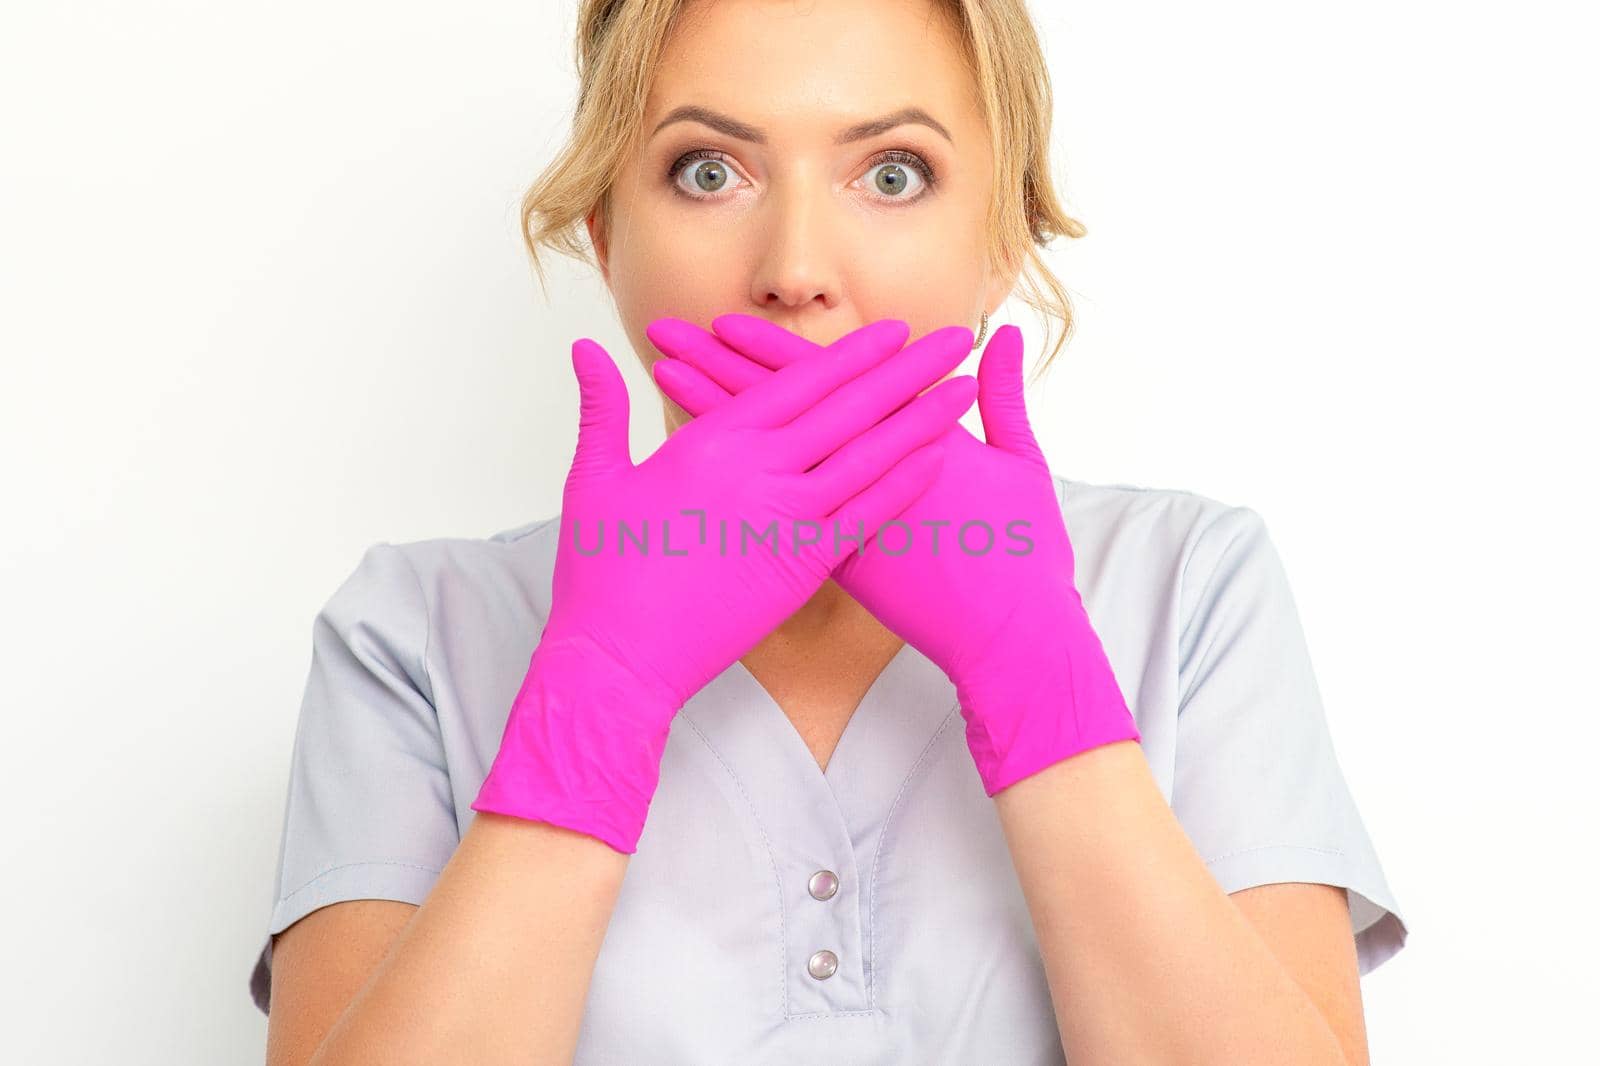 Portrait of a young female caucasian doctor or nurse is shocked covering her mouth with her pink gloved hands against a white background